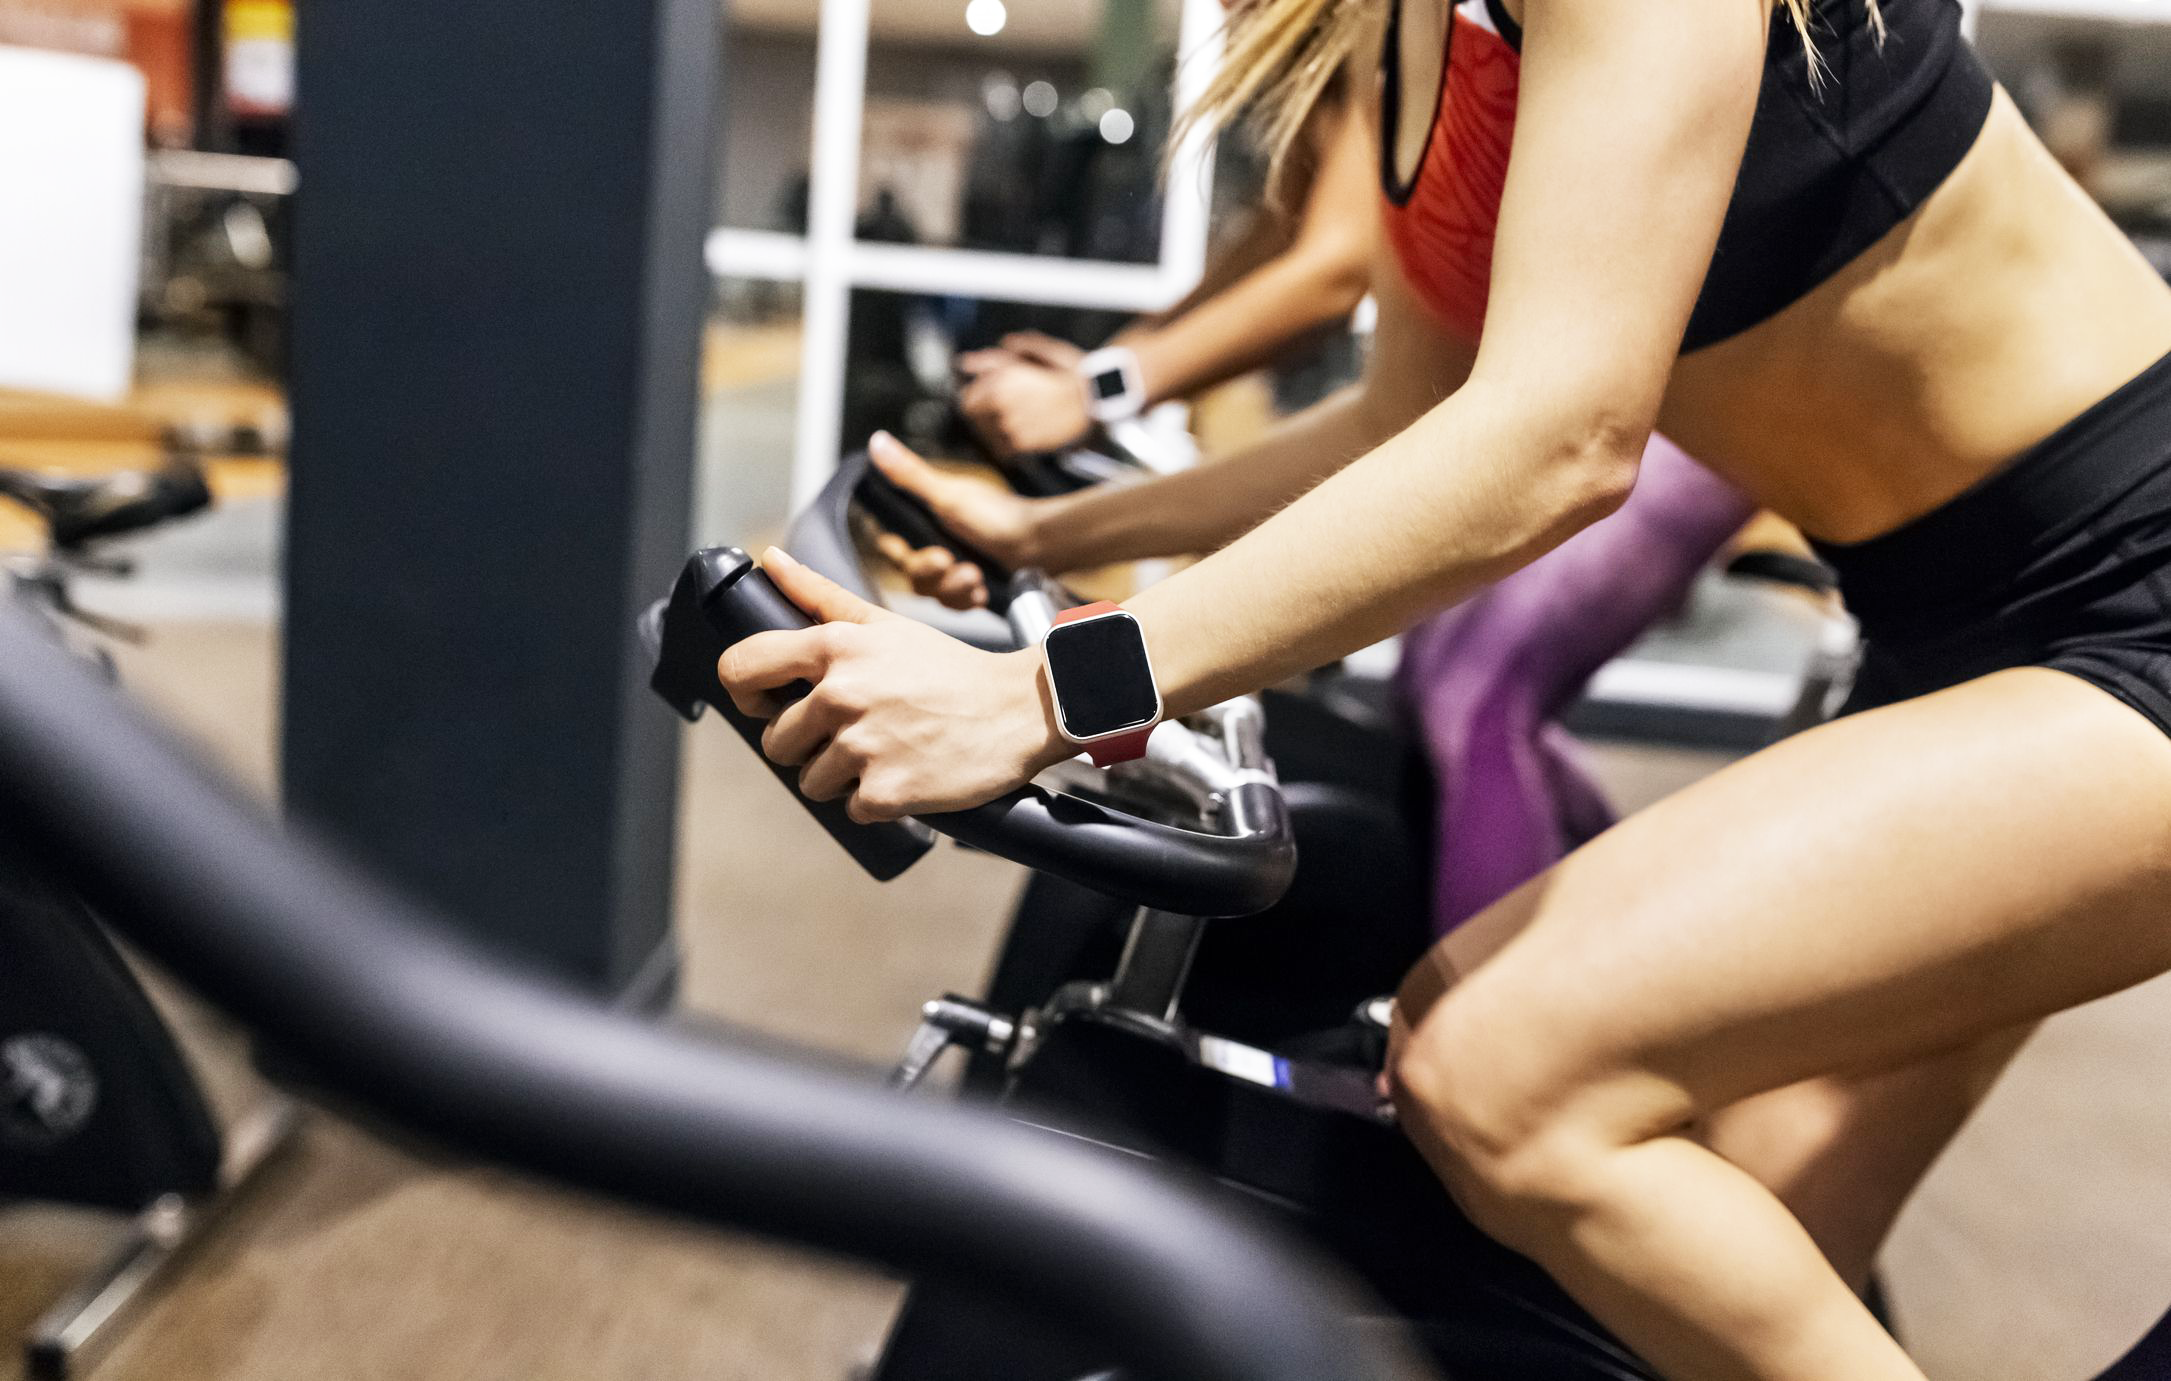 7 Stationary Bike Workouts to Fit Your Goals